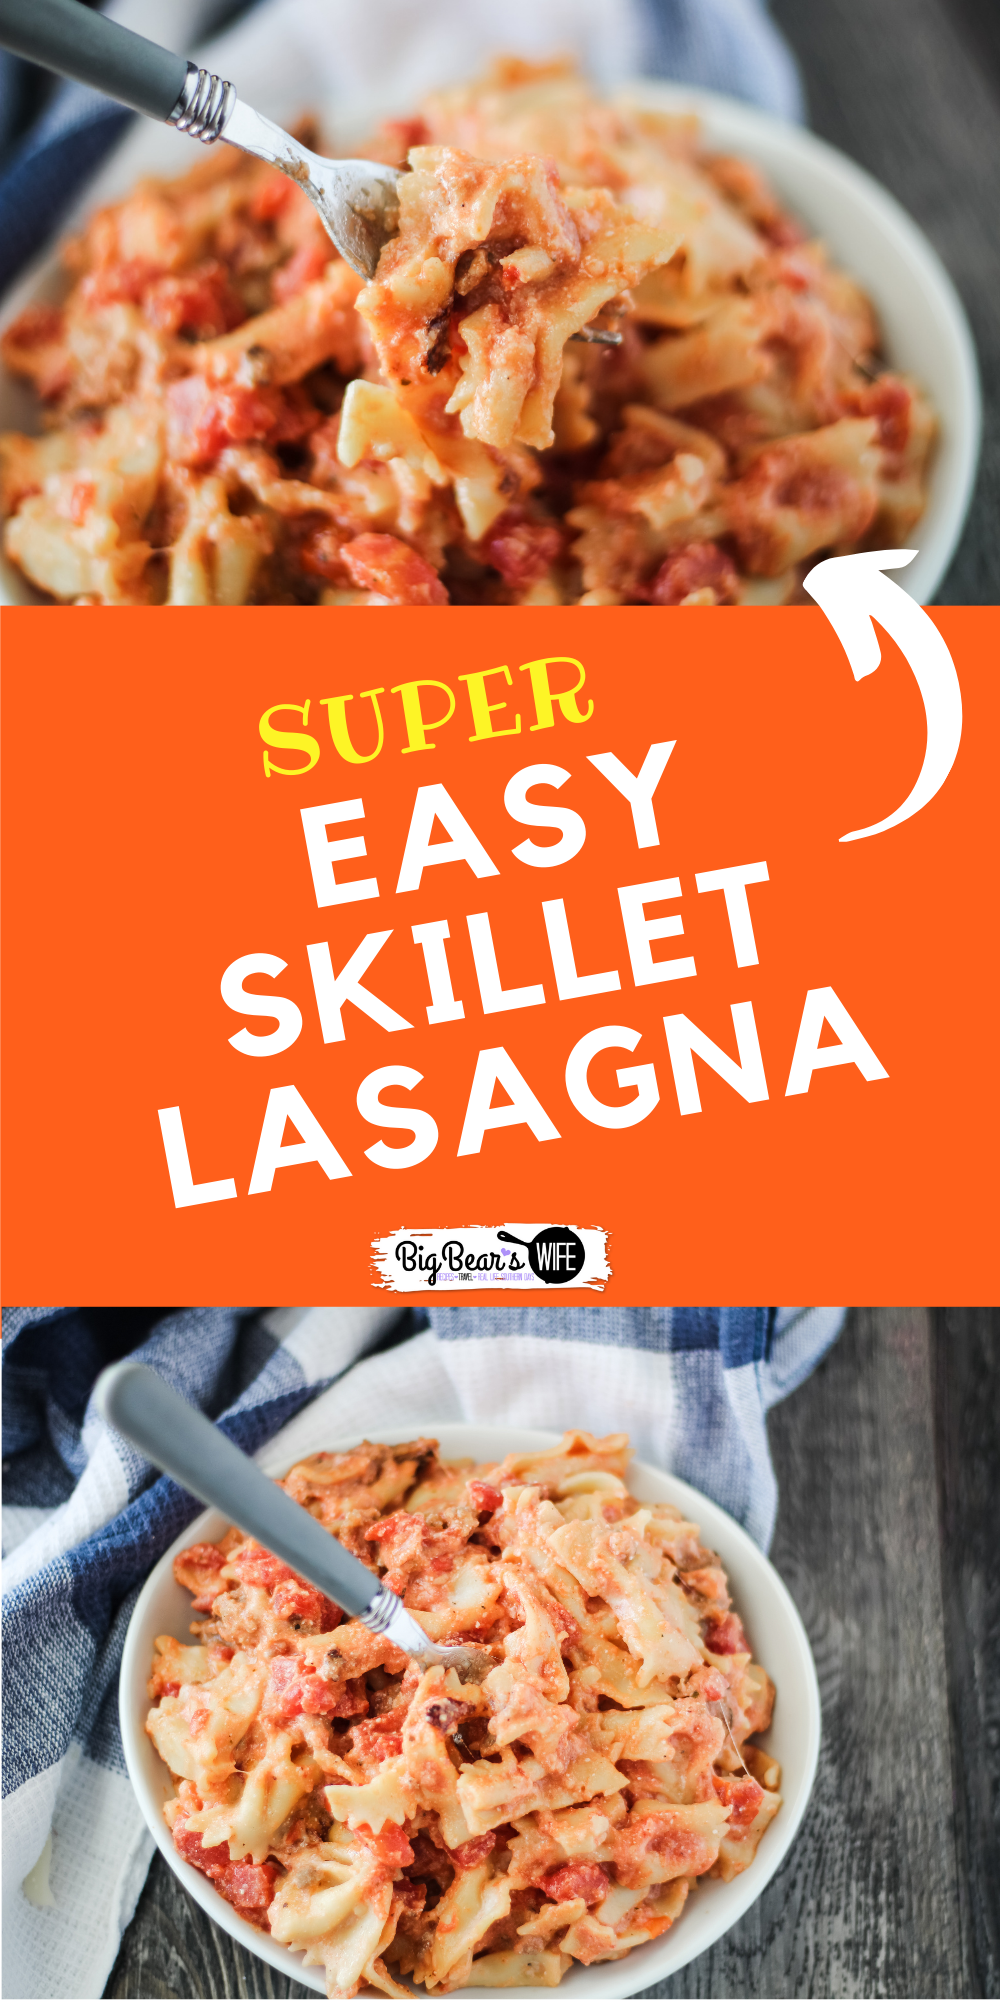 This Super Easy Skillet Lasagna will be a new family favorite and it only takes 30 minutes to make.  via @bigbearswife